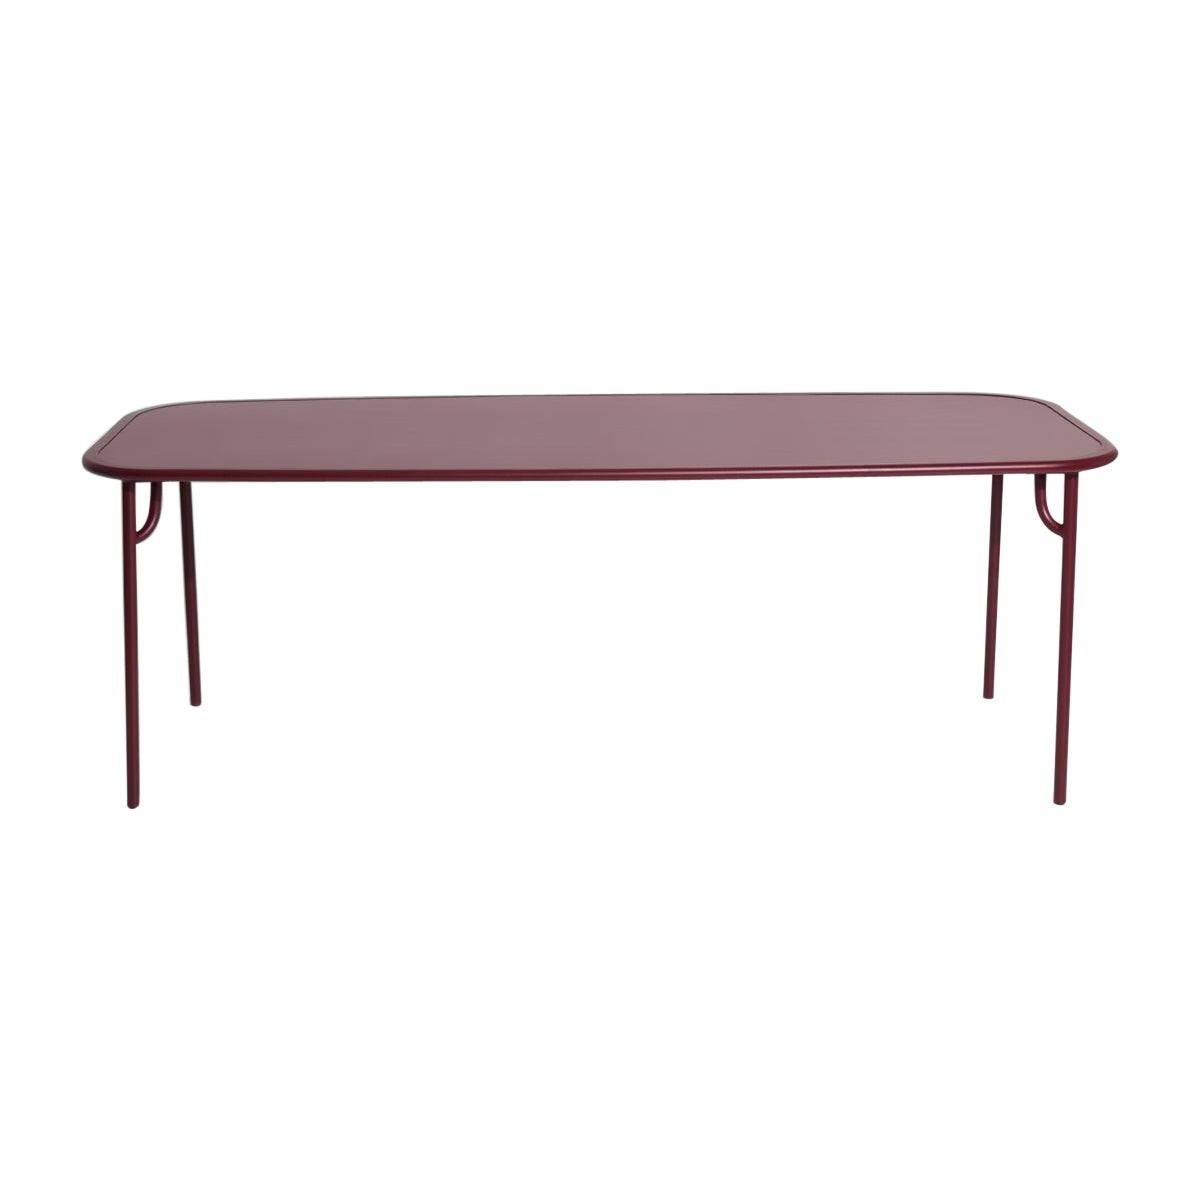 Petite Friture Week-End Large Plain Rectangular Dining Table in Burgundy, 2017 For Sale